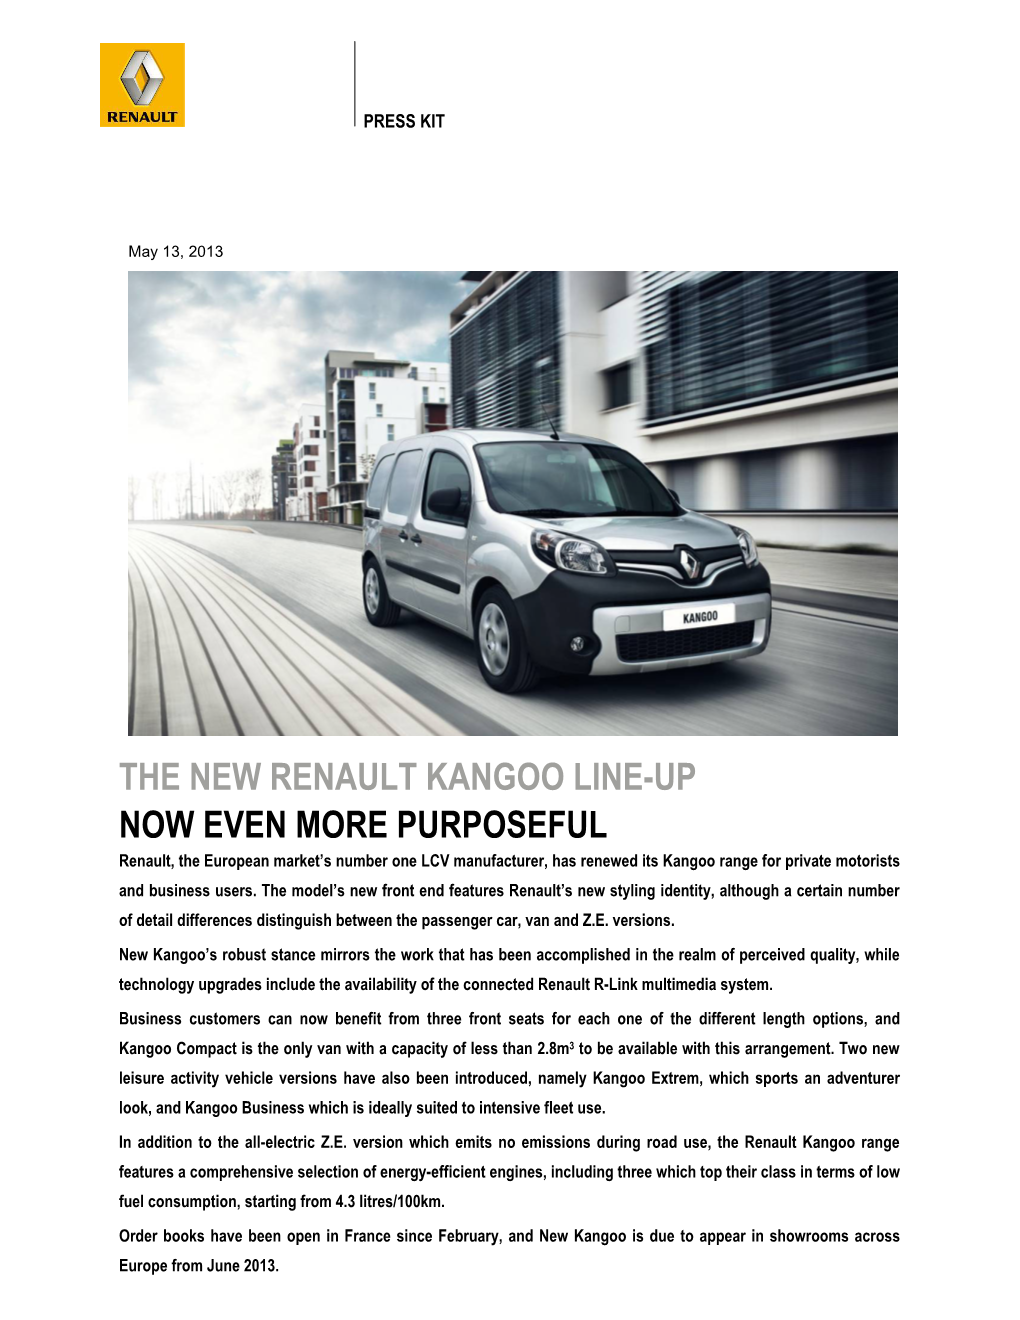 The New Renault Kangoo Line-Up Now Even More